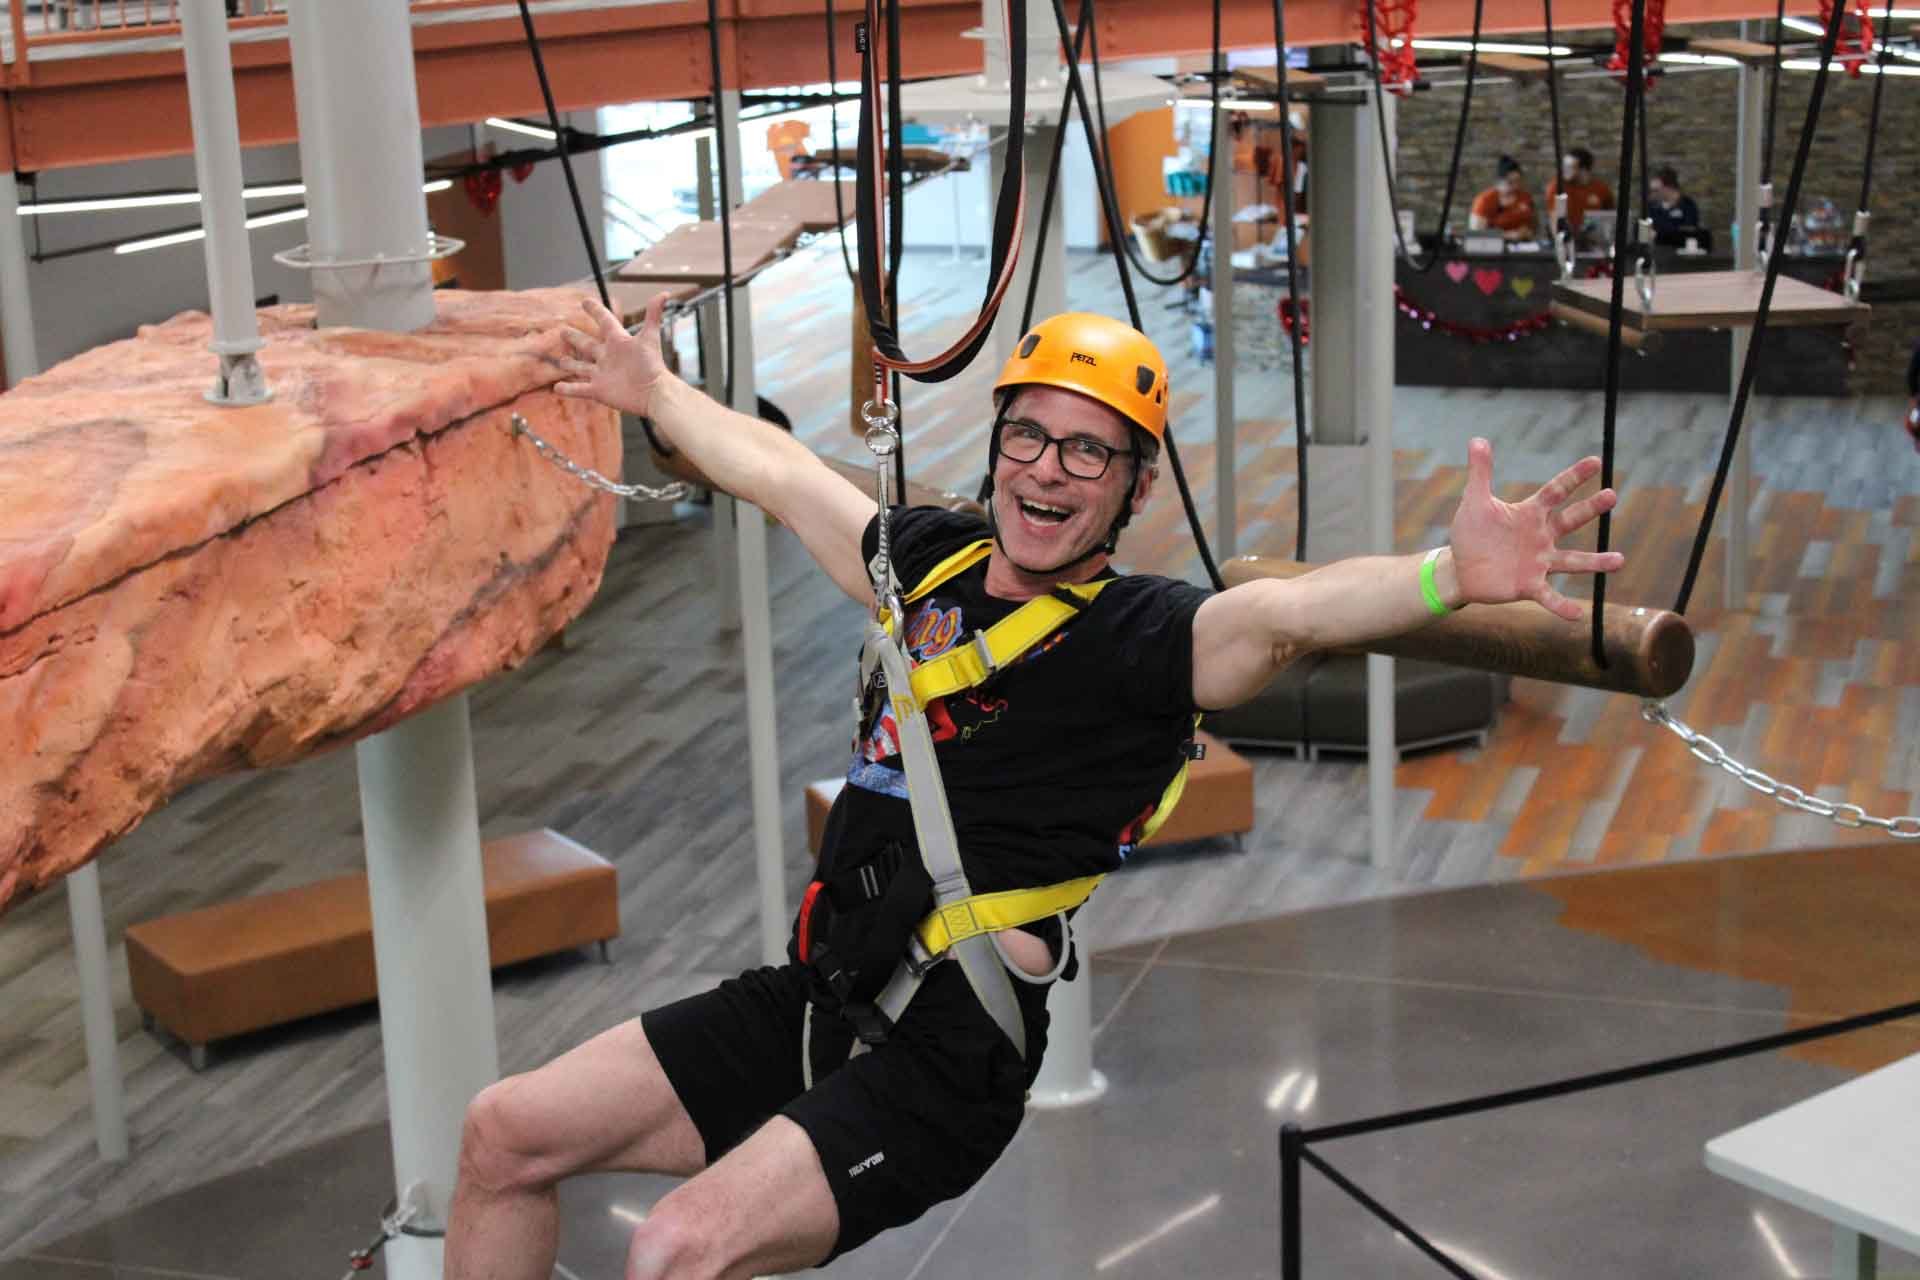 company-events-fun-hang-out-ropes-course-adventure